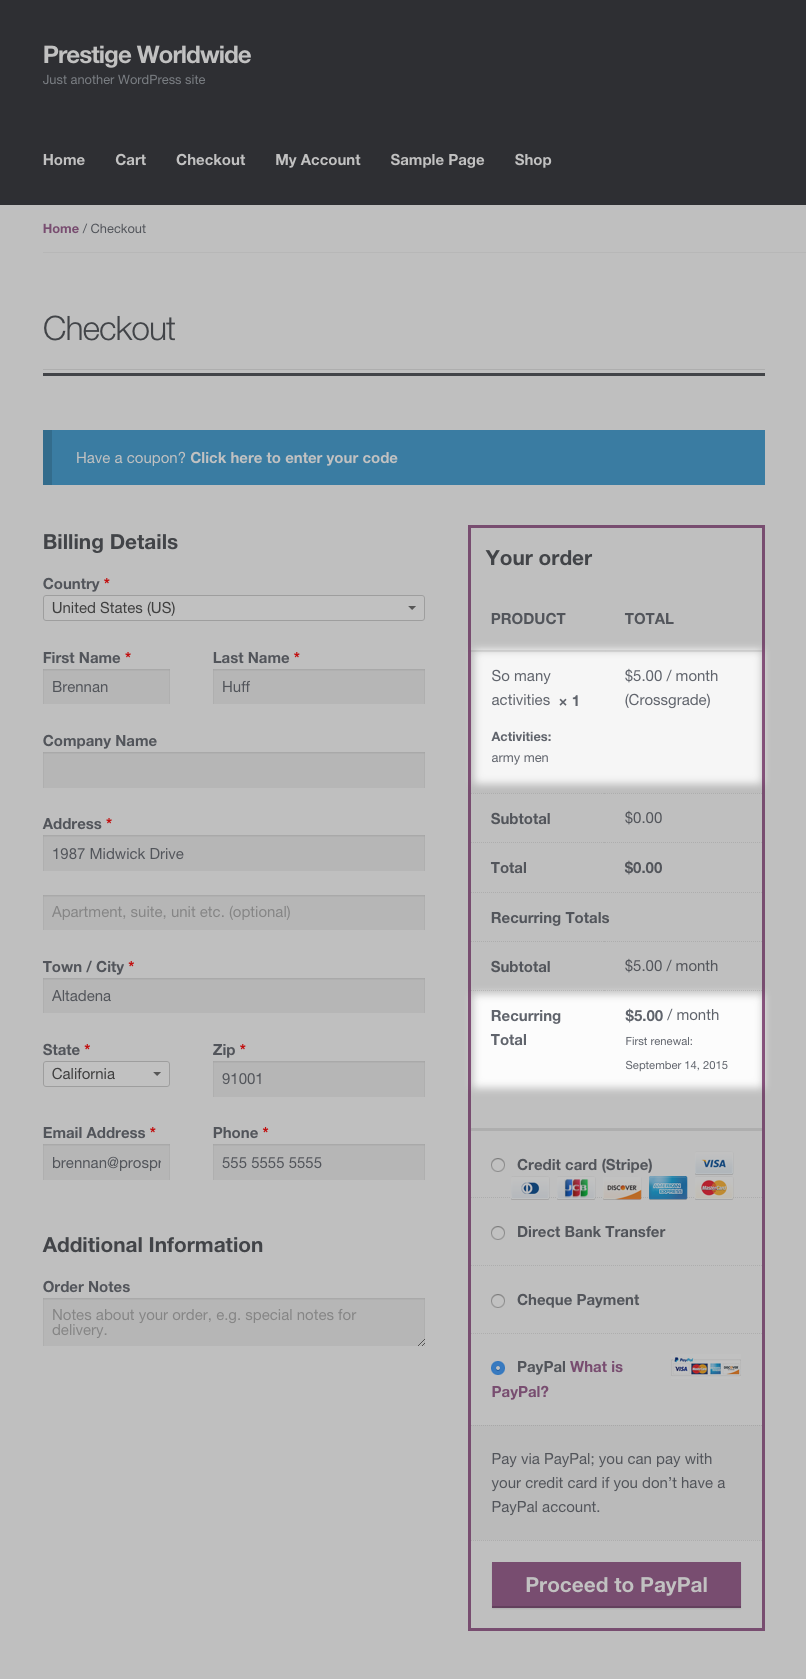 2. Subscription Switch Details in Cart